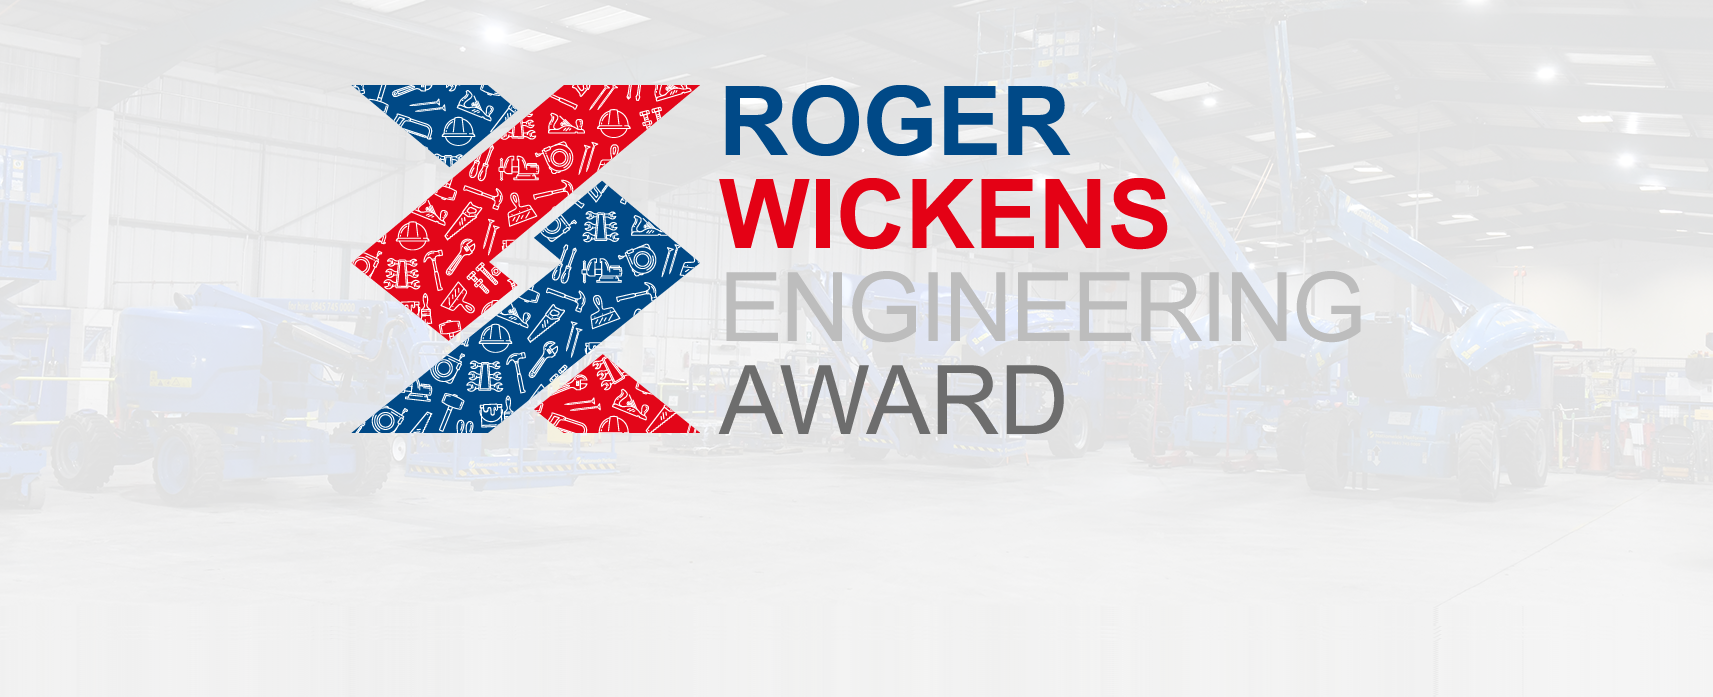 The Roger Wickens Engineering Award 2021